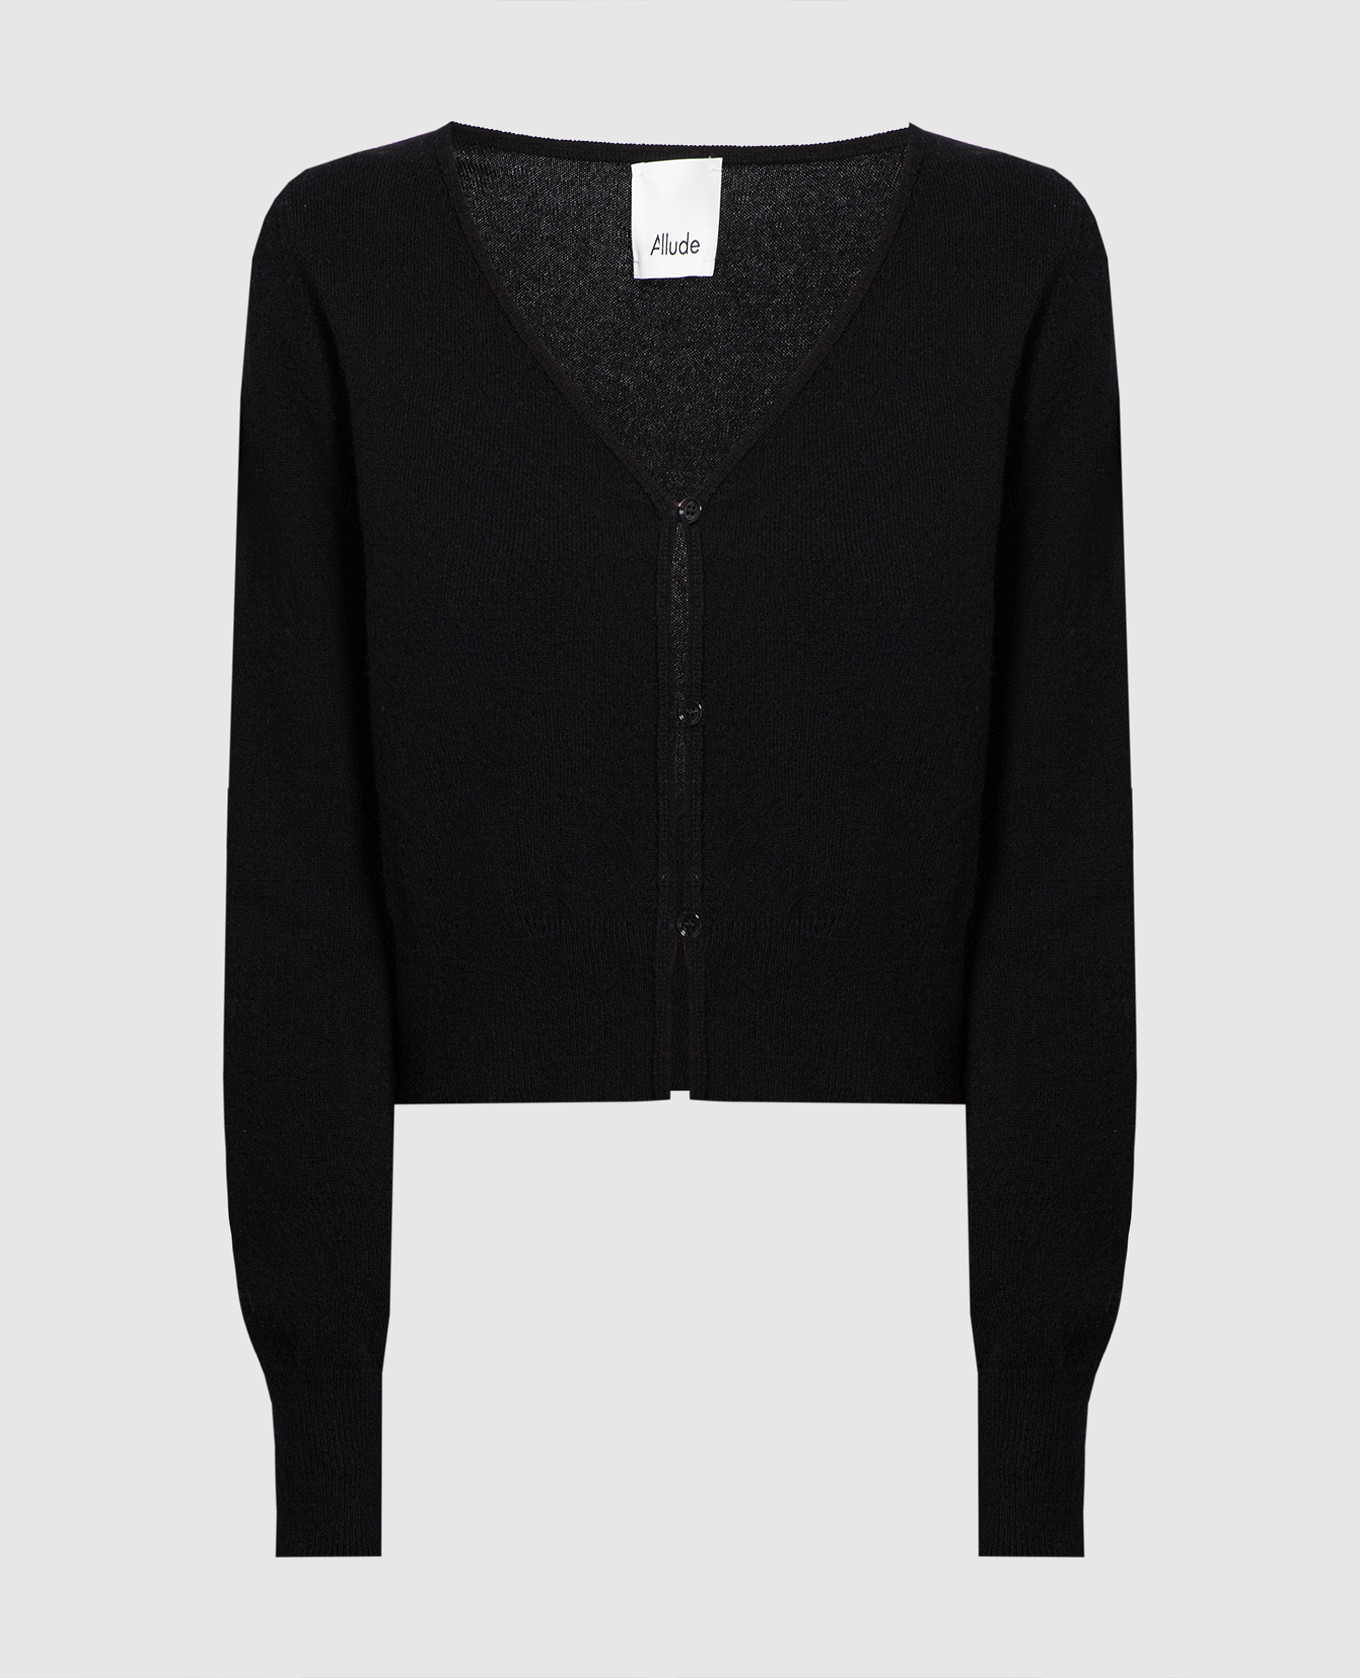 Black wool and cashmere cardigan